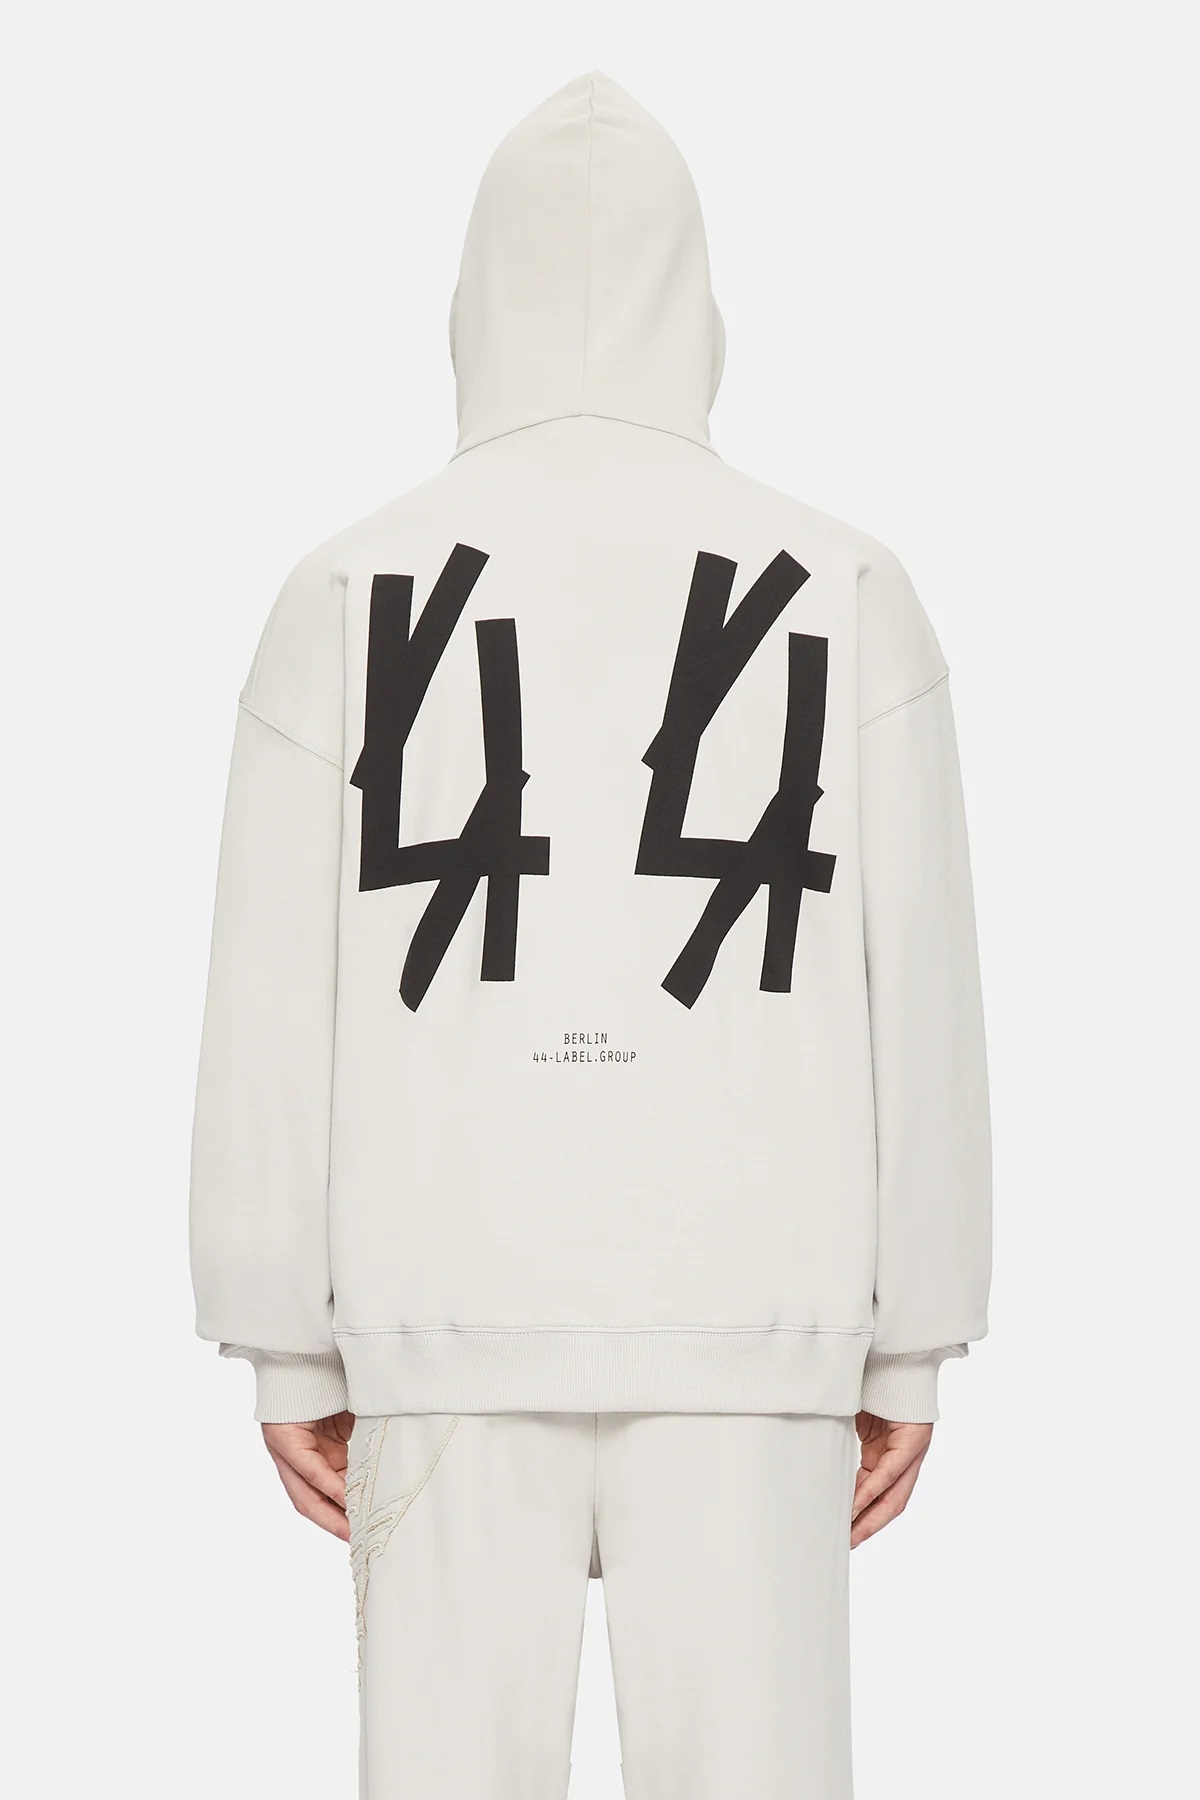 44 LABEL GROUP New Classic Hoodie in Dirty White/Black XL